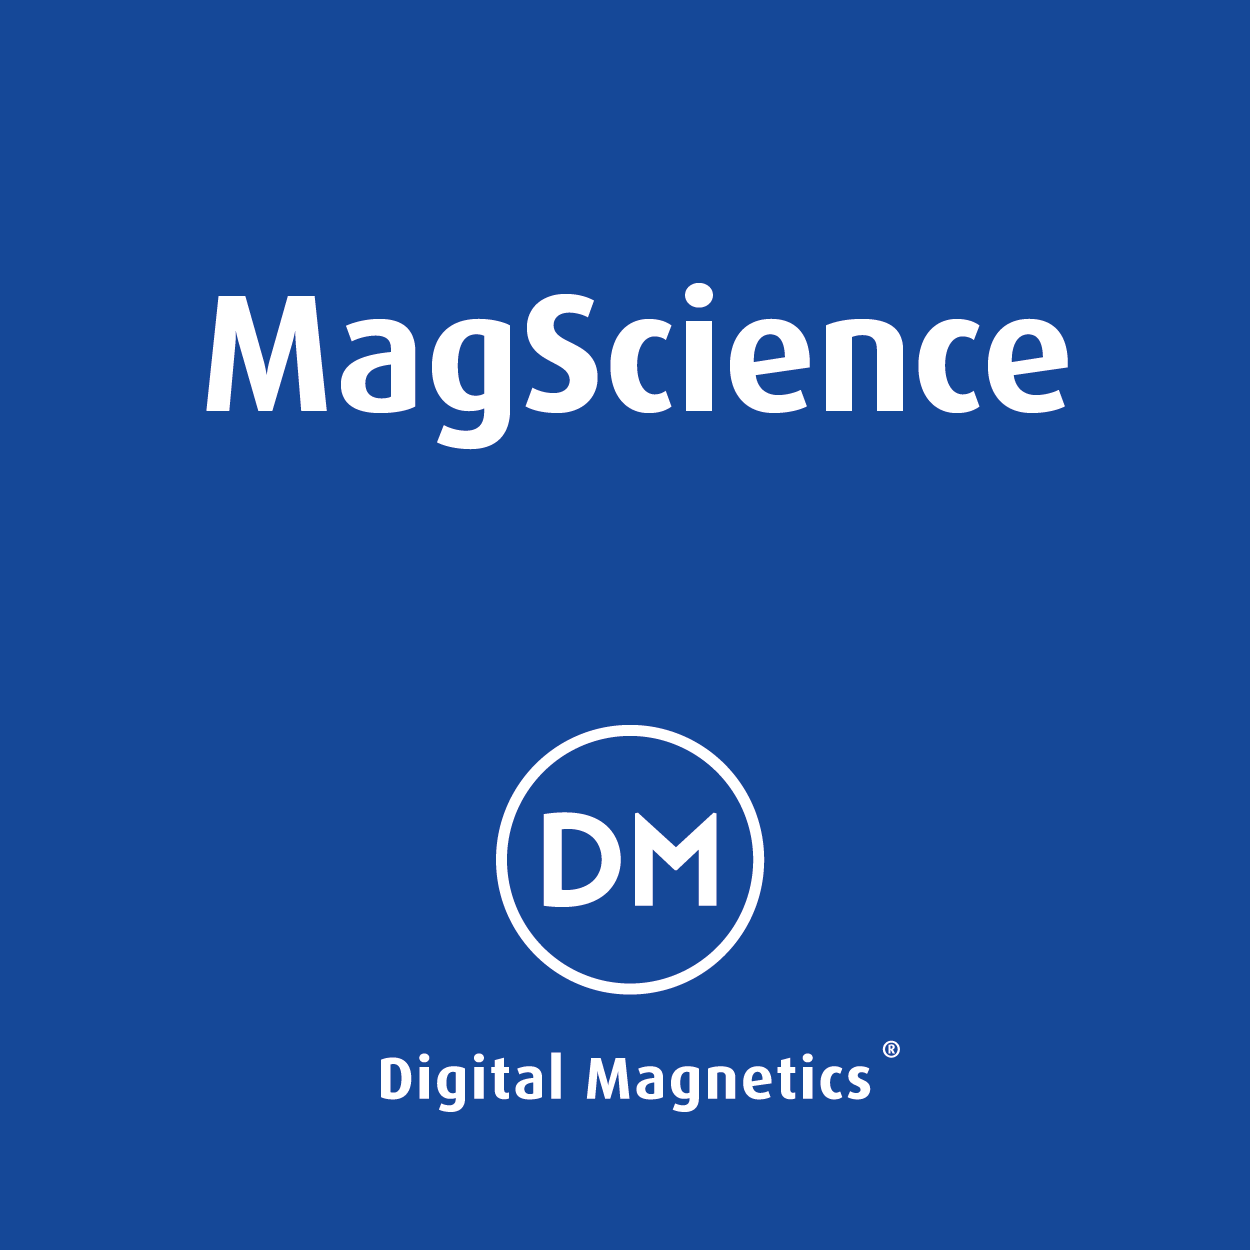 Sentec introduces MagScience by Digital Magnetics, a new generation of printable magnets